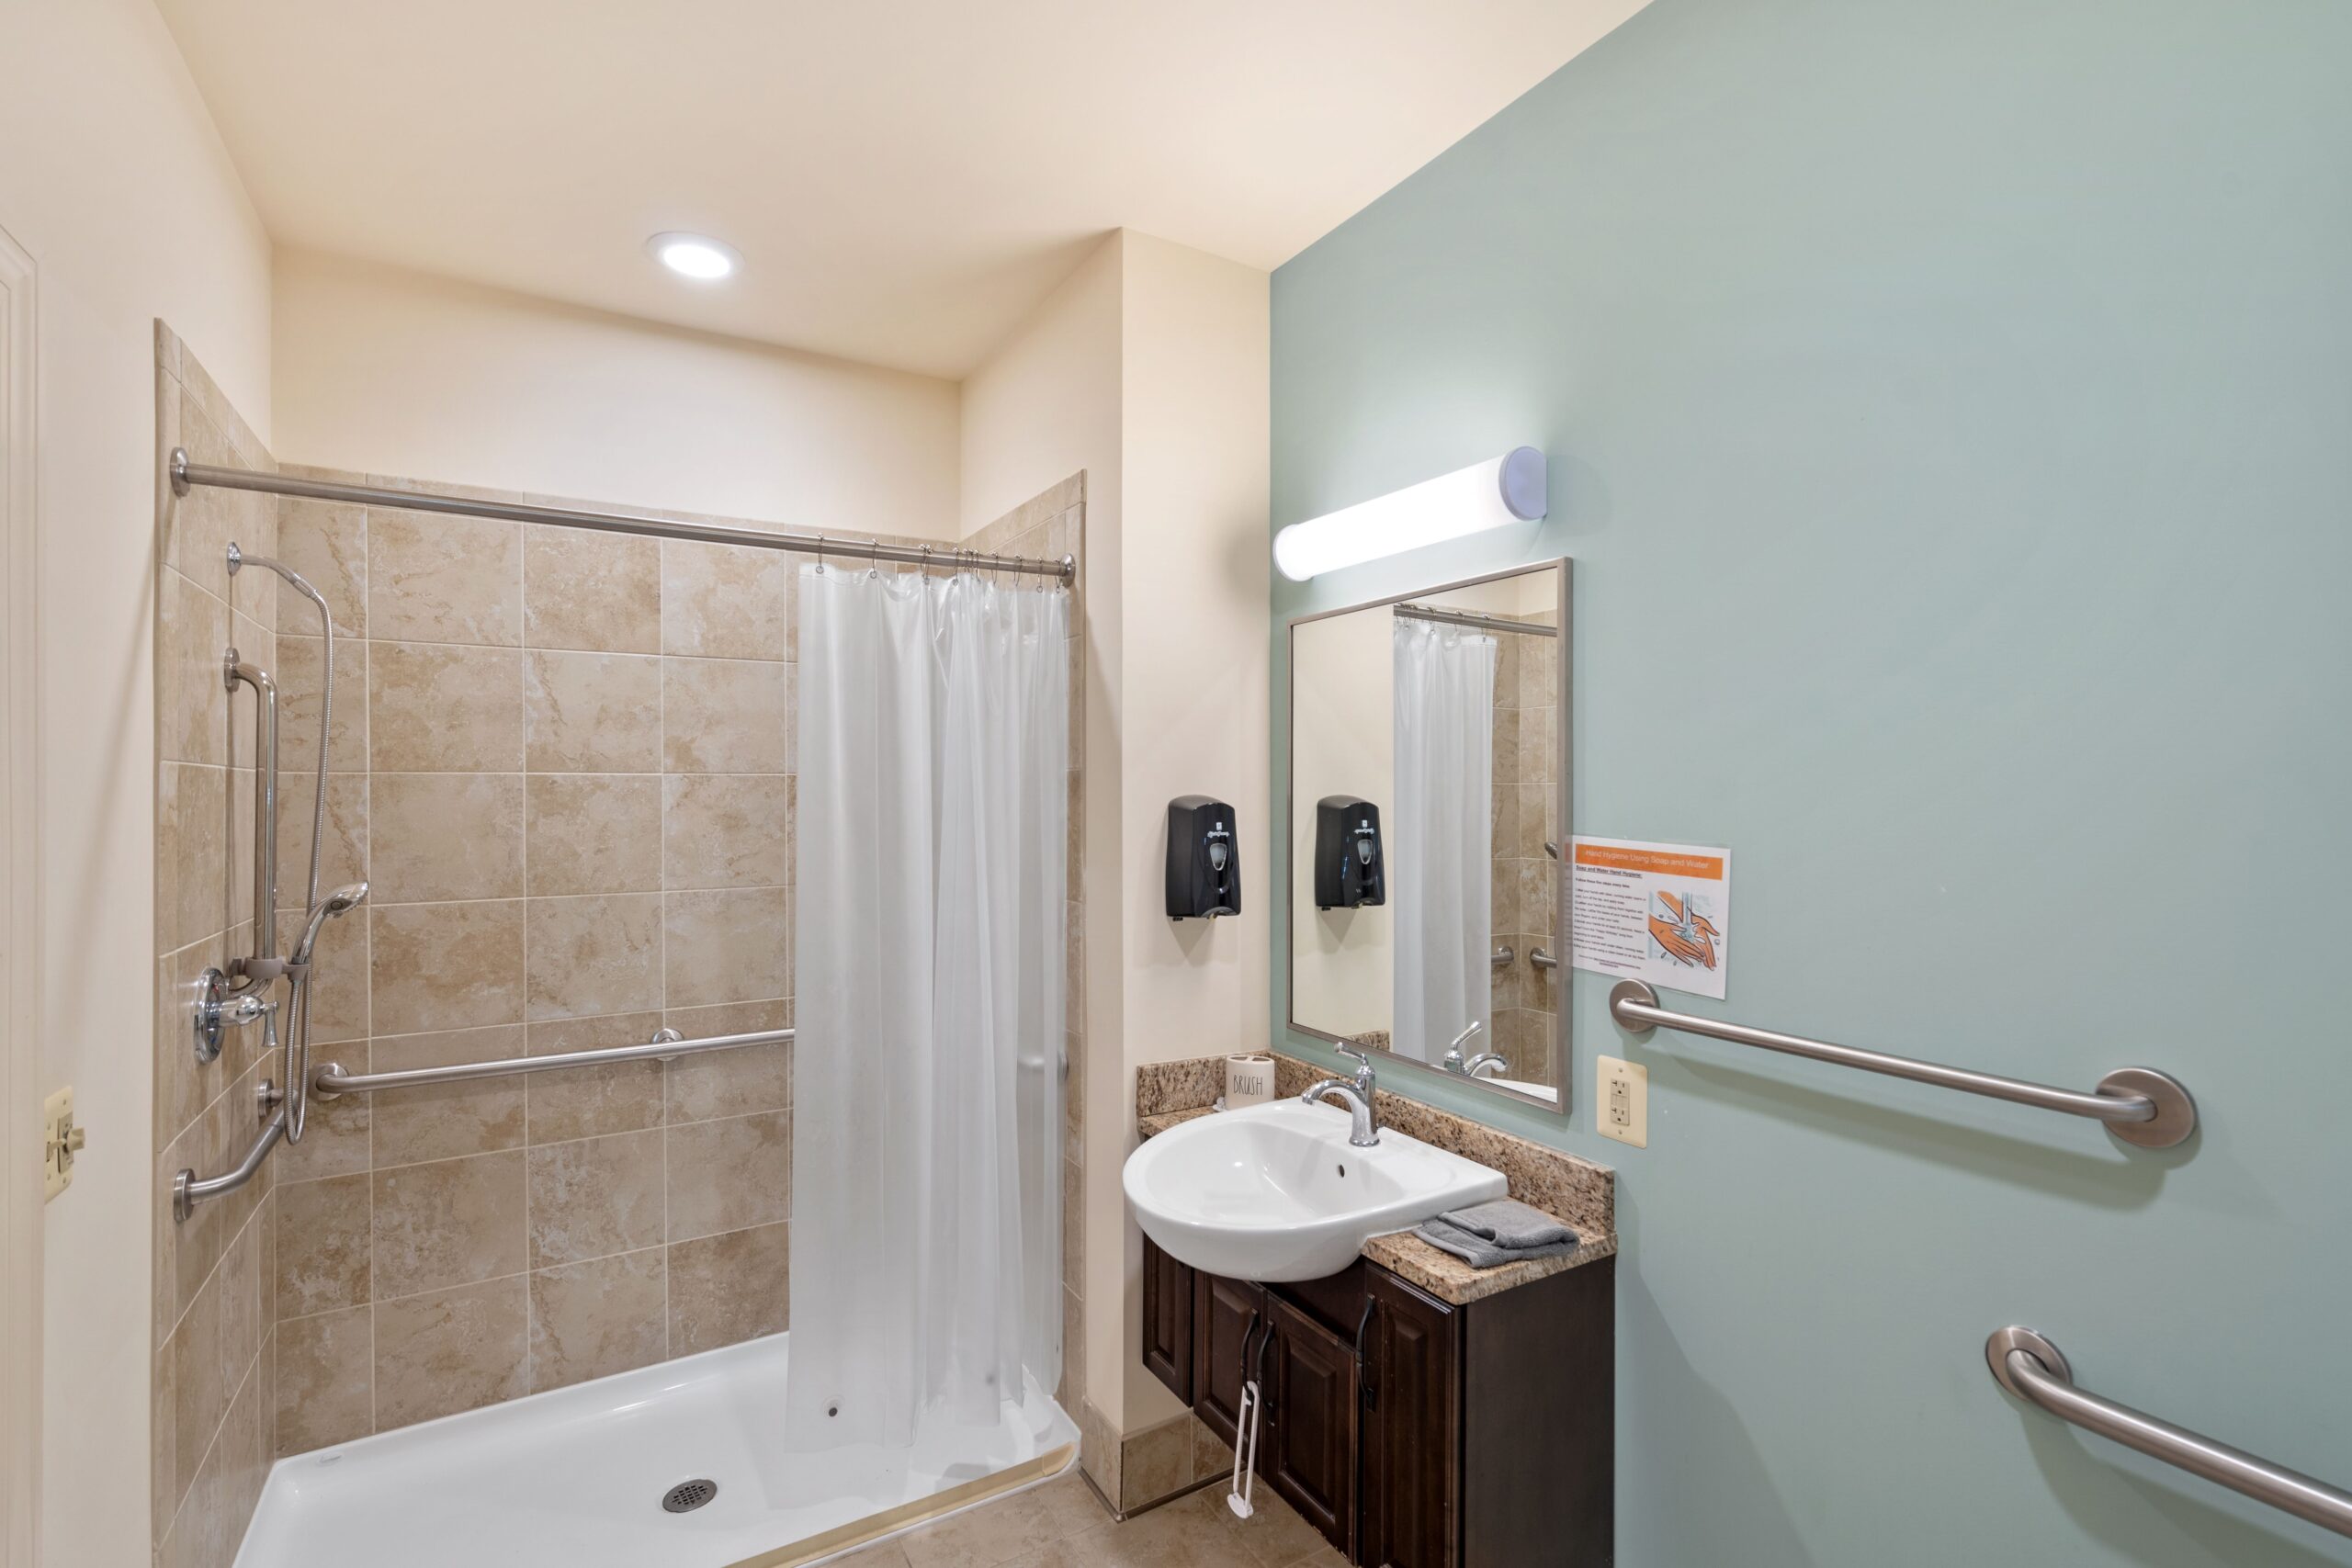 Bathroom with walk-in shower and hand rails